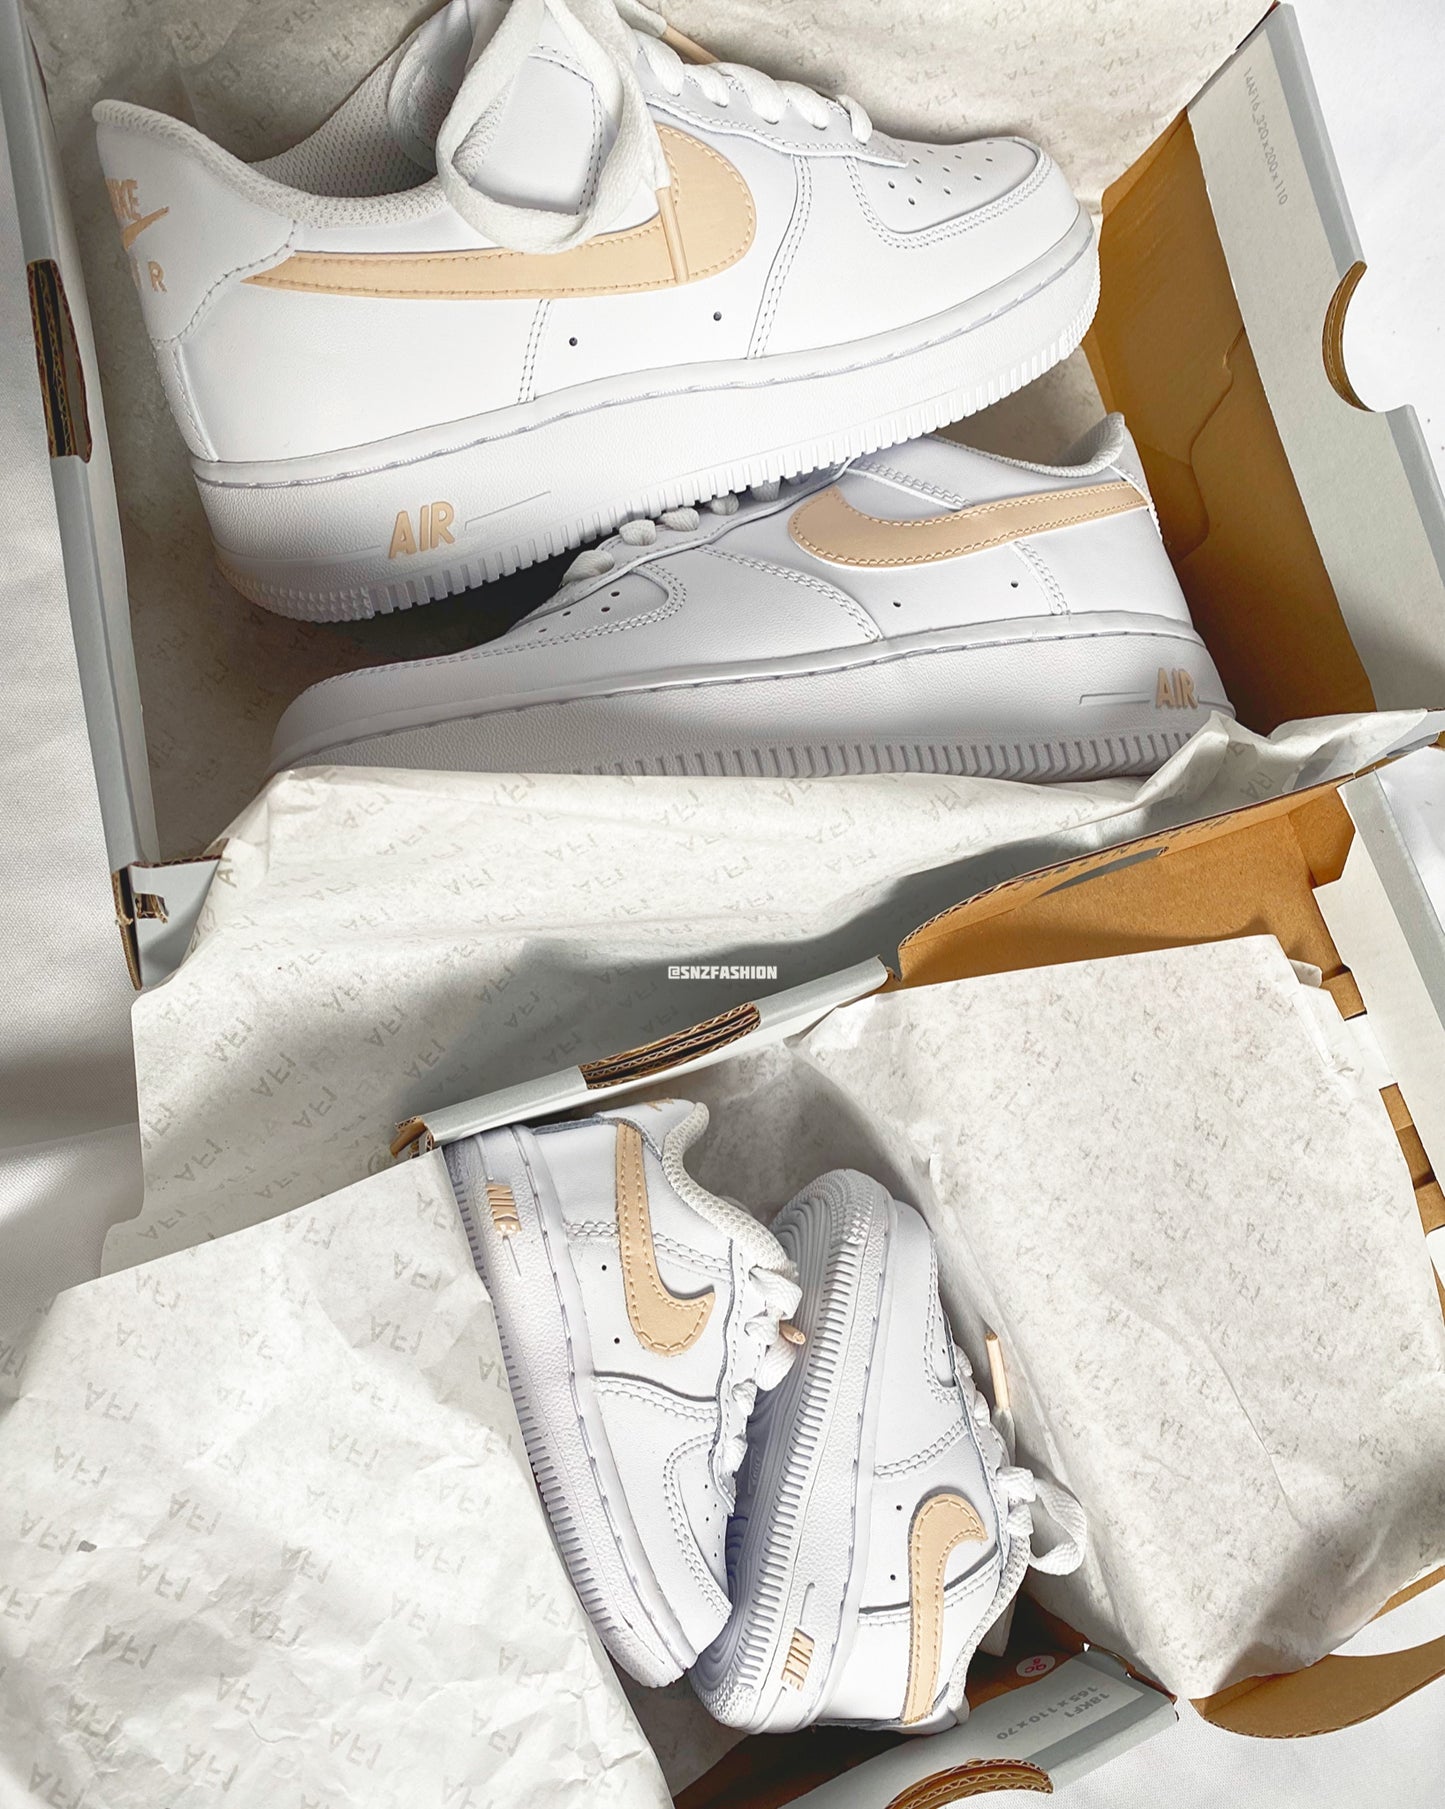 COLOURSWOOSH 2 PAIRS NIKE AIR FORCE 1'S + €15 OFF!